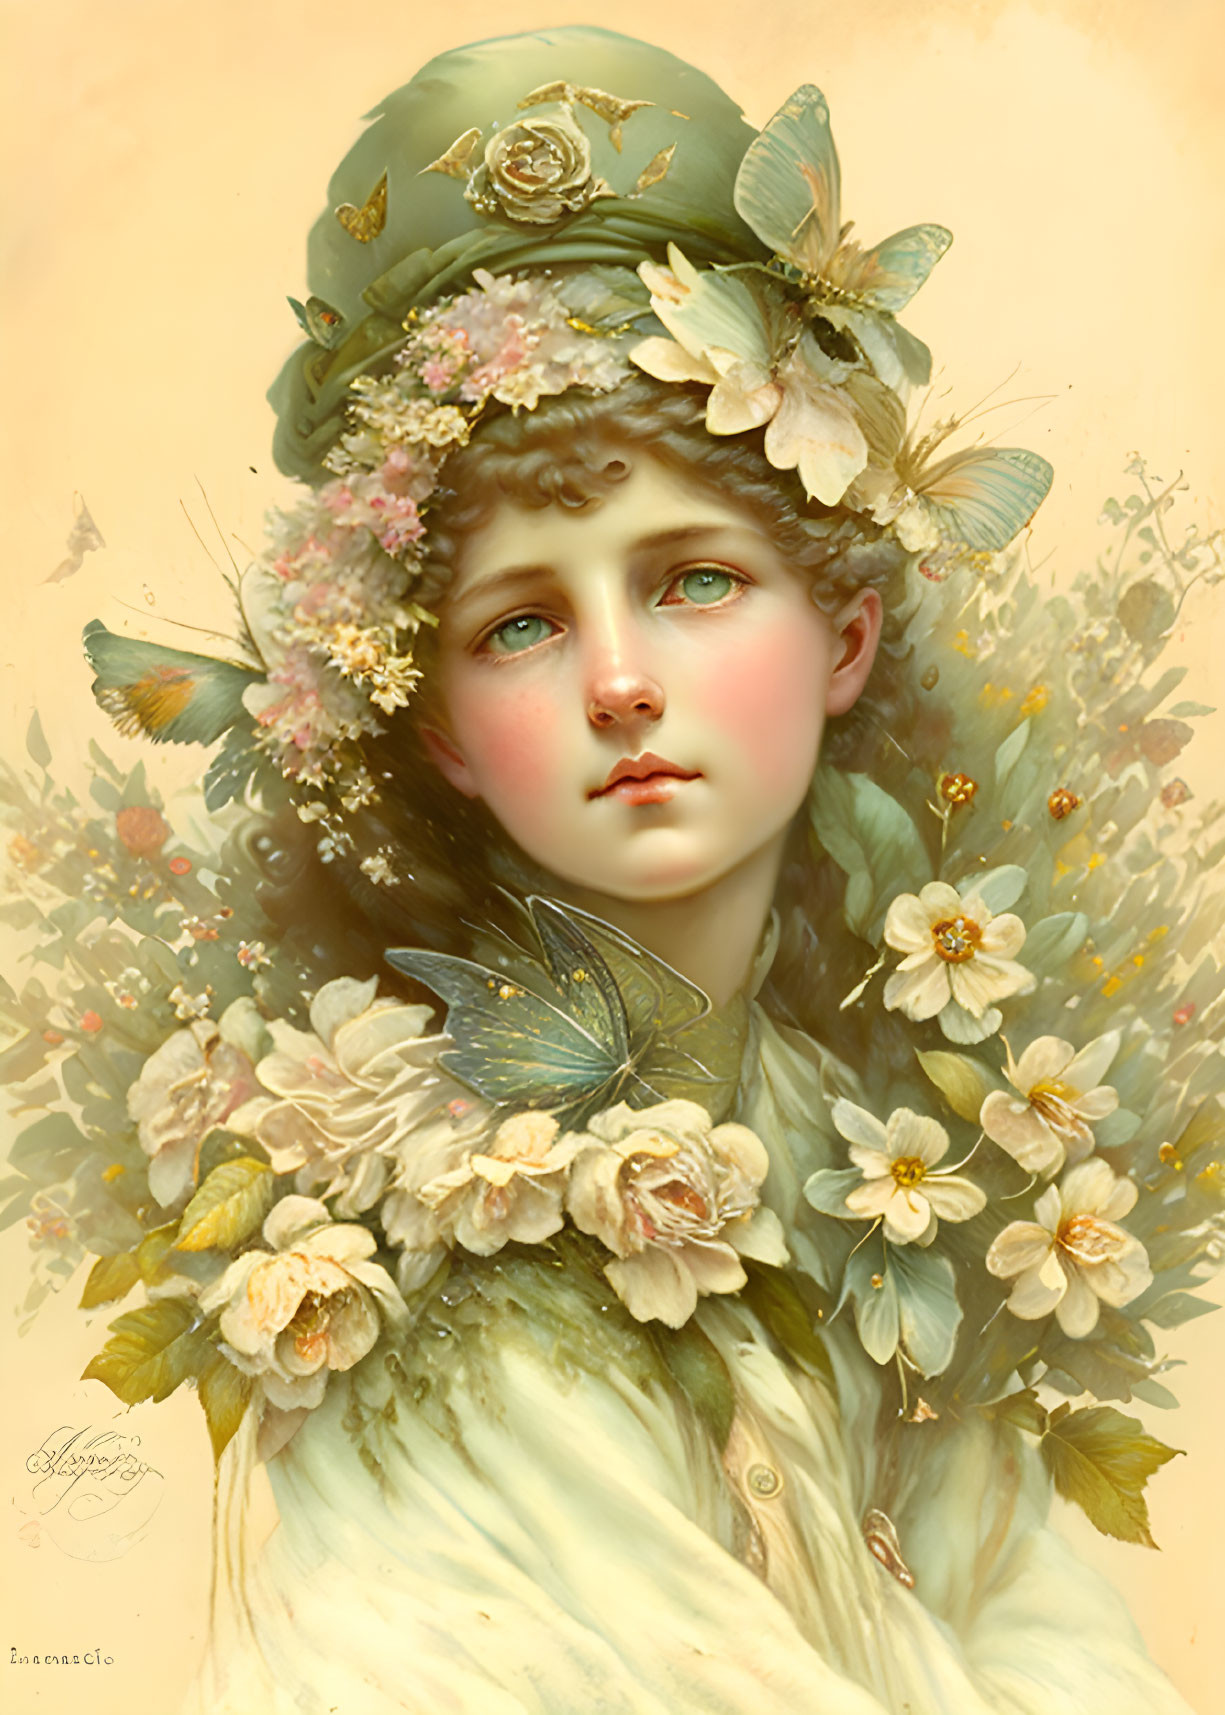 Portrait of Woman in Green Hat Surrounded by Floral and Butterfly Motifs